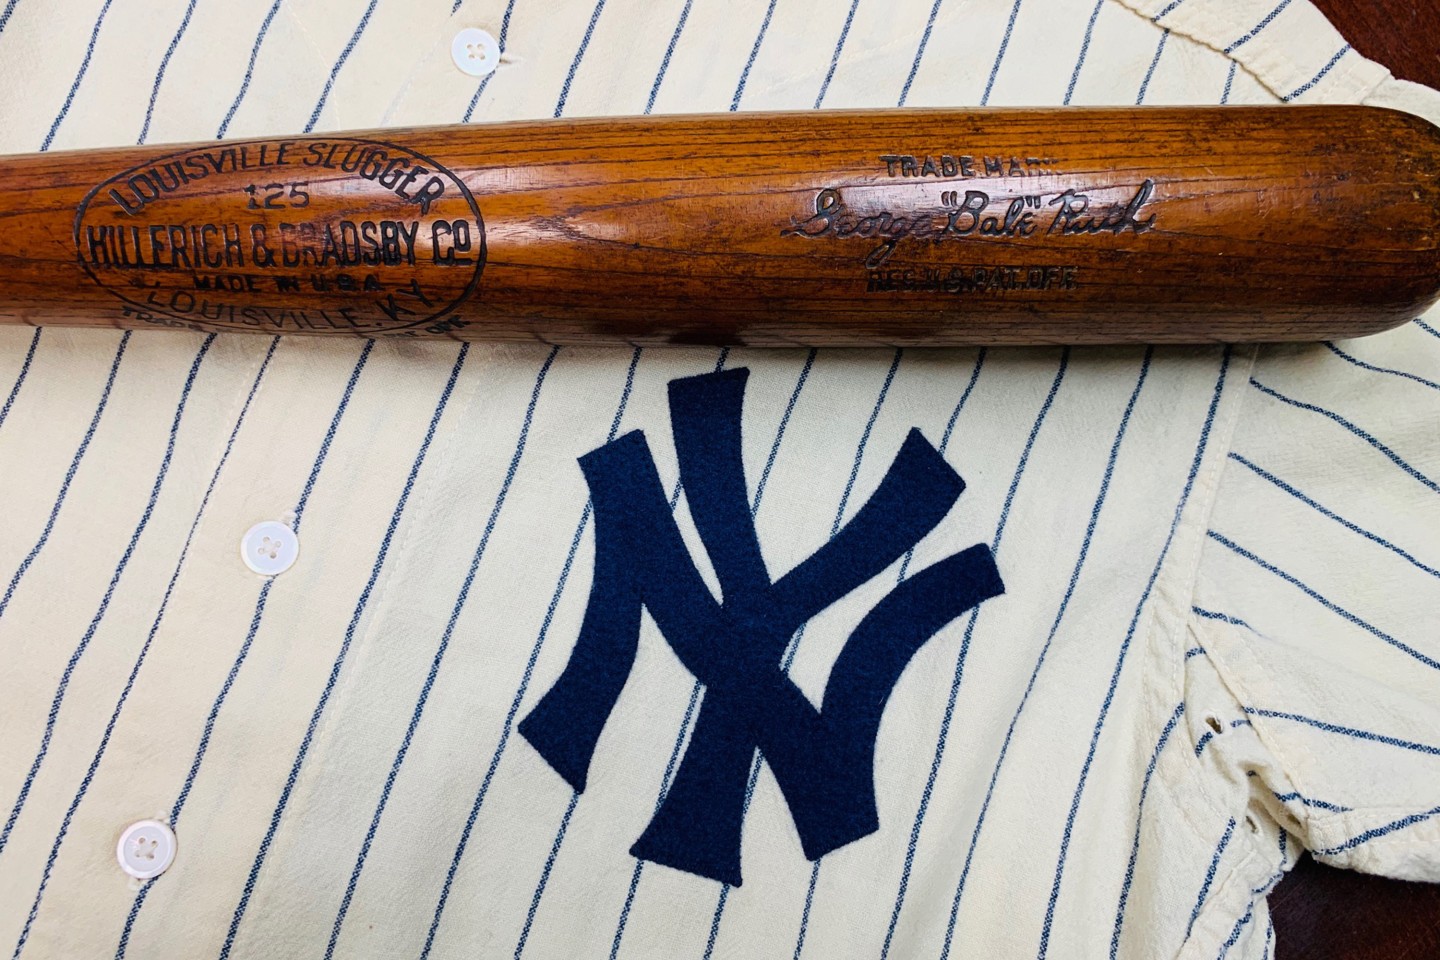 Babe Ruth 1929 500th Home Run Baseball Bat | Auction House: SCP Auctions | Price fetched: $1,000,800 | Auctioned: December 14, 2019